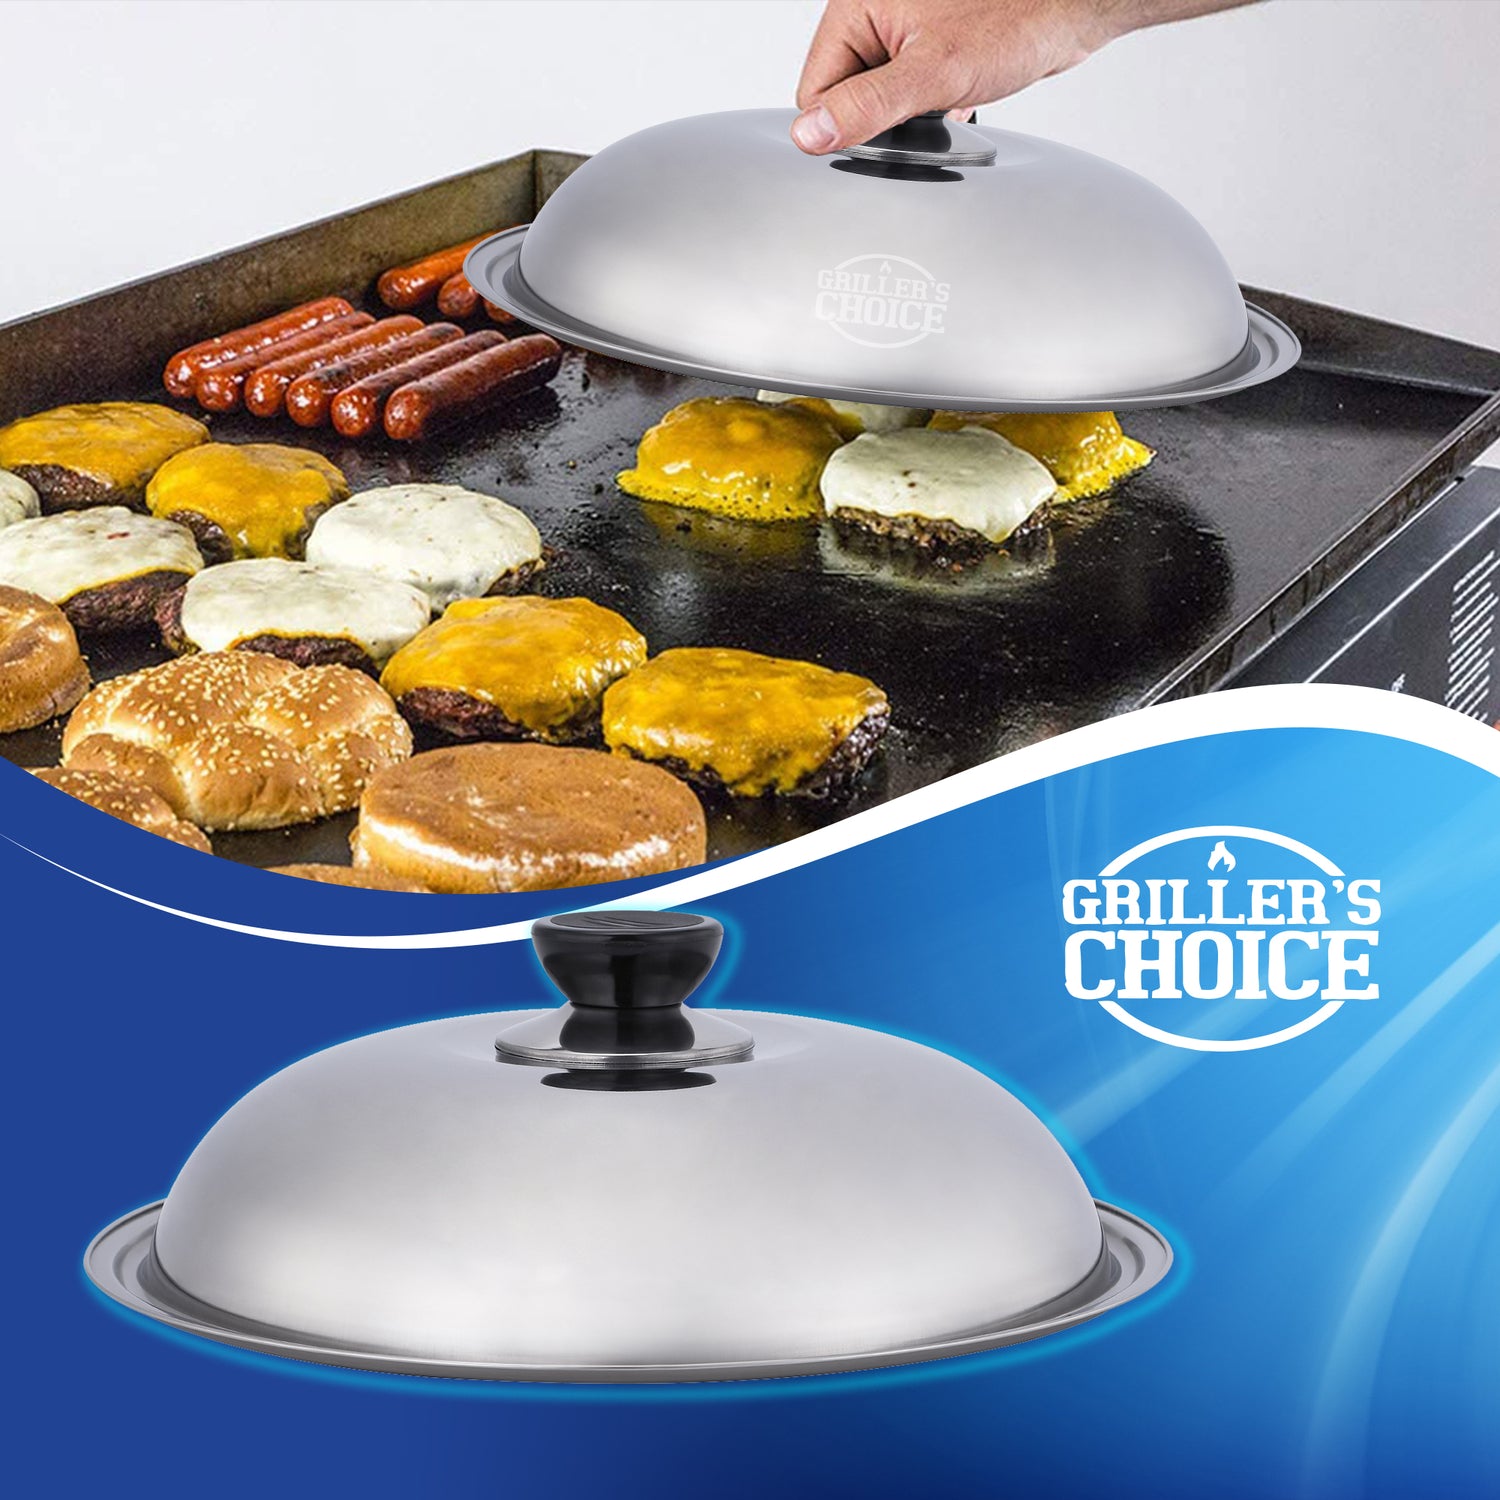 Griddle Accessories BBQ Grill Set - 9pcs Stainless Steel Barbecue